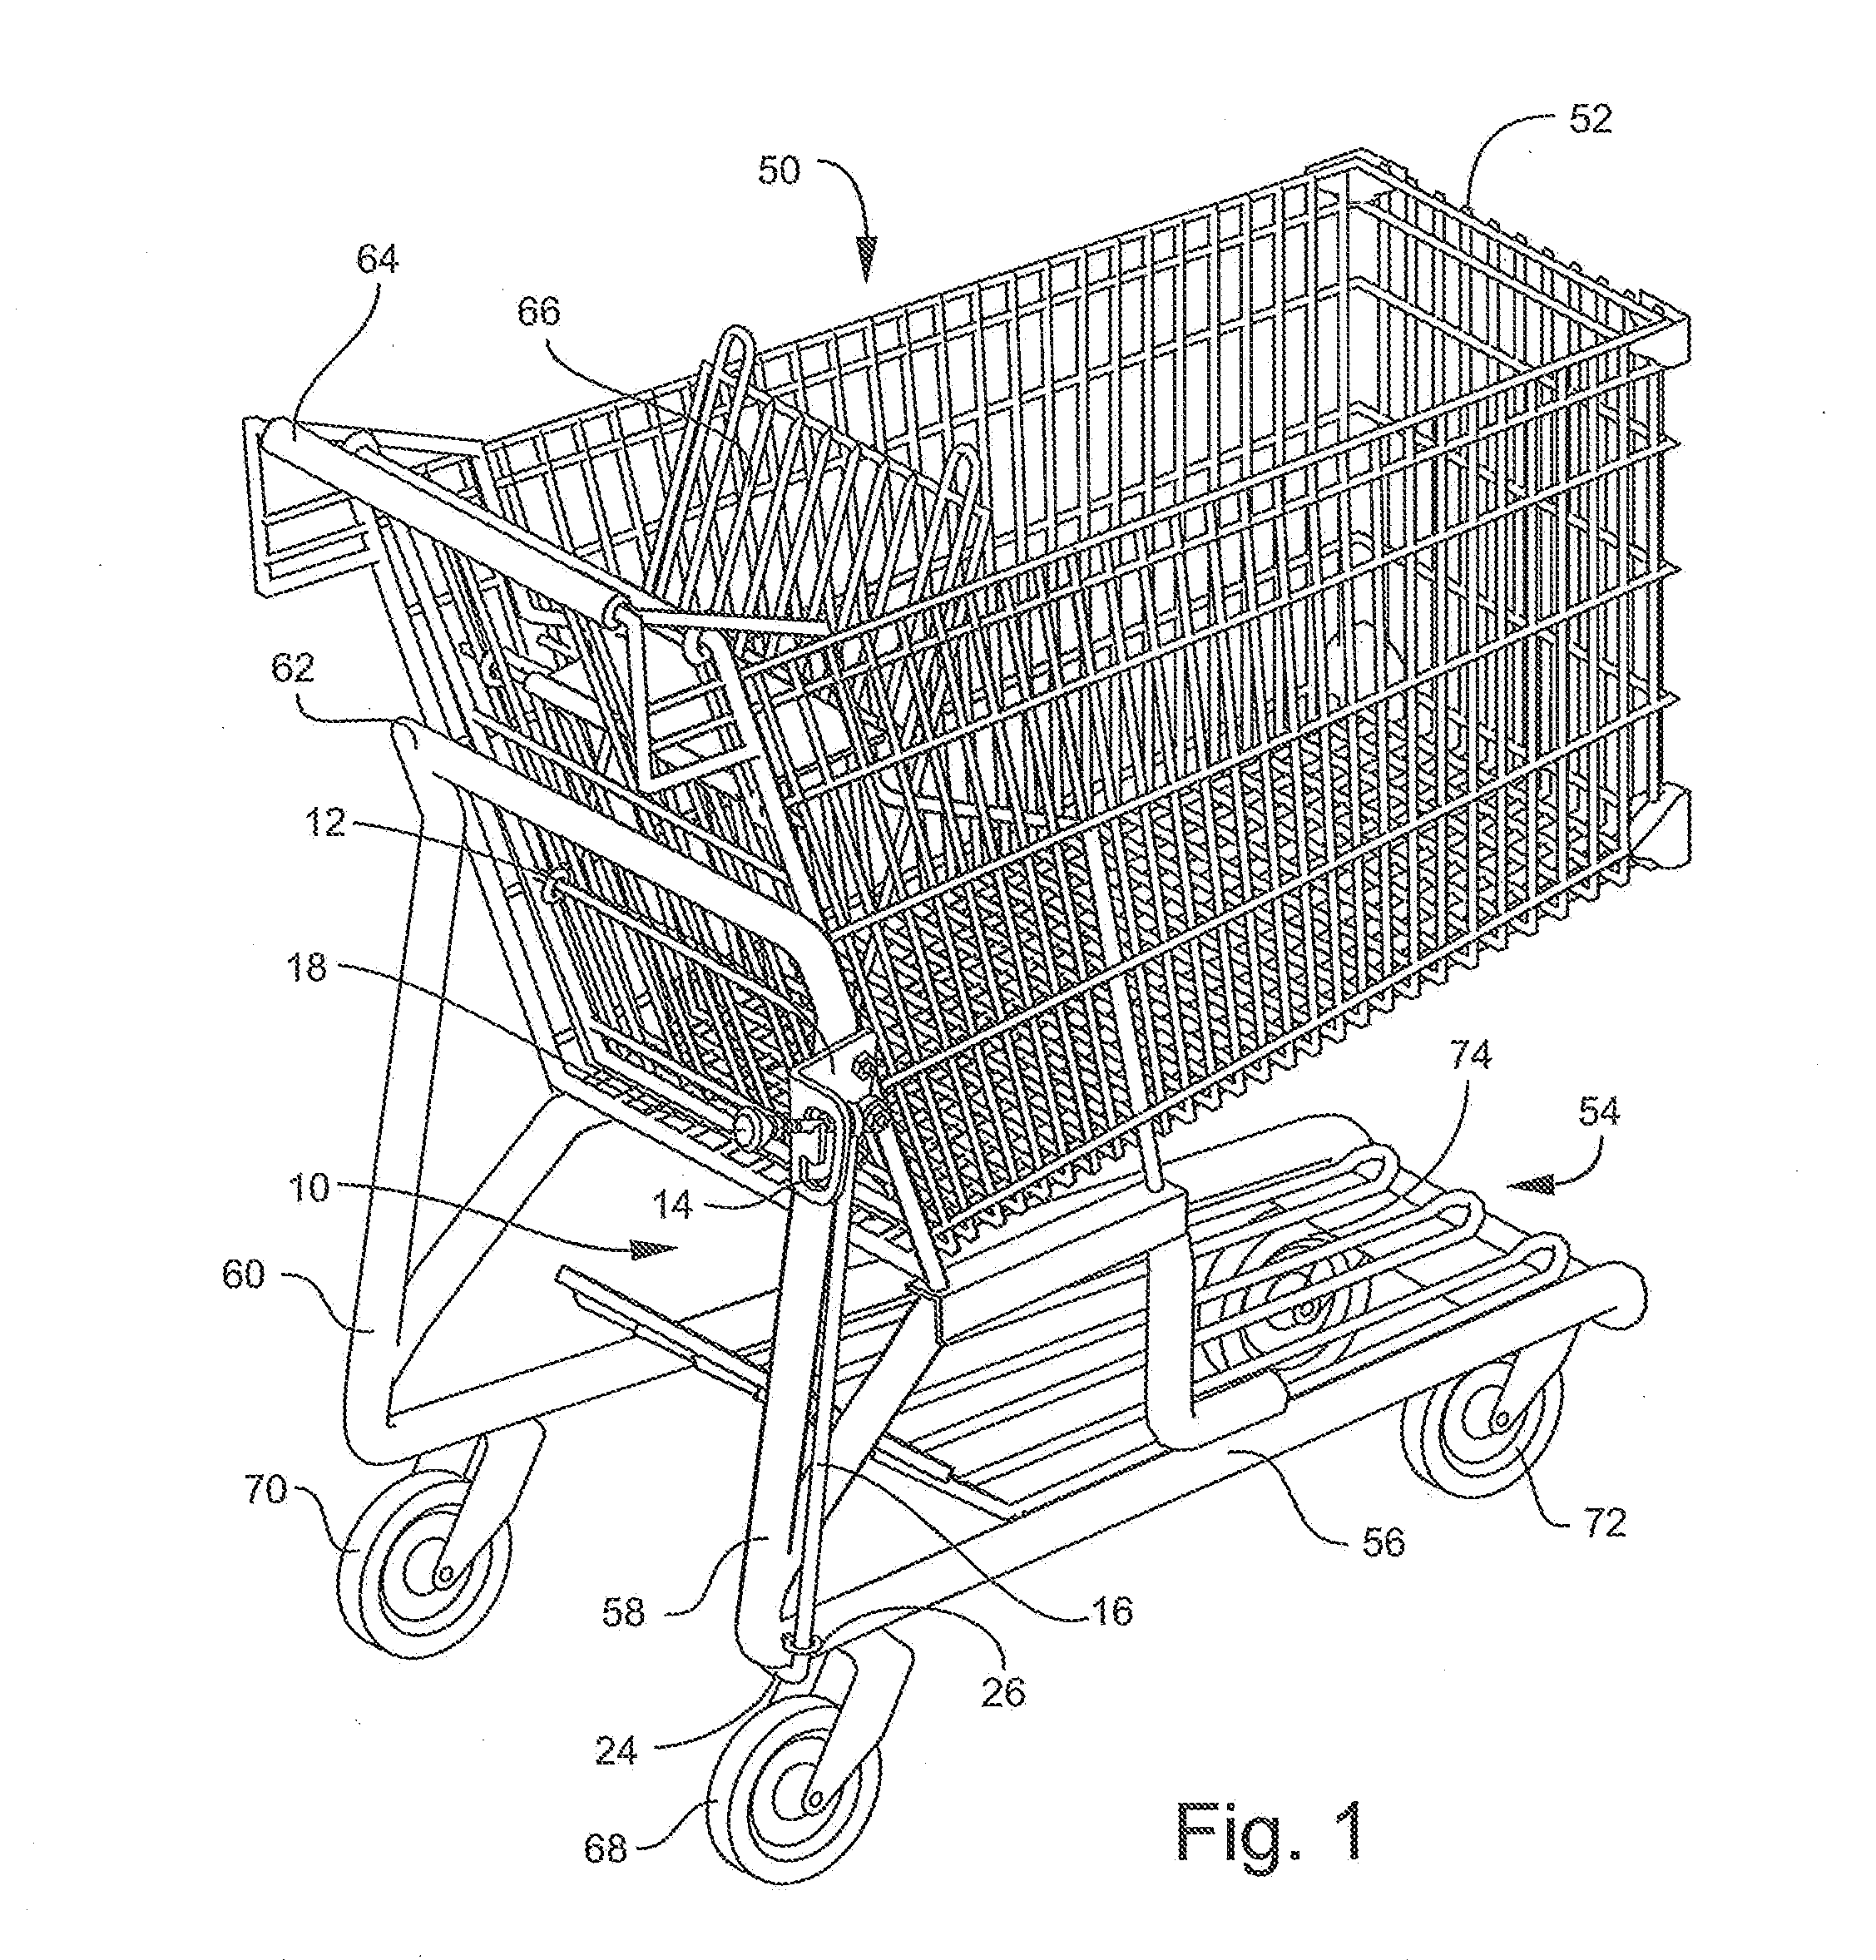 Cart brake and cart with user-operable brake